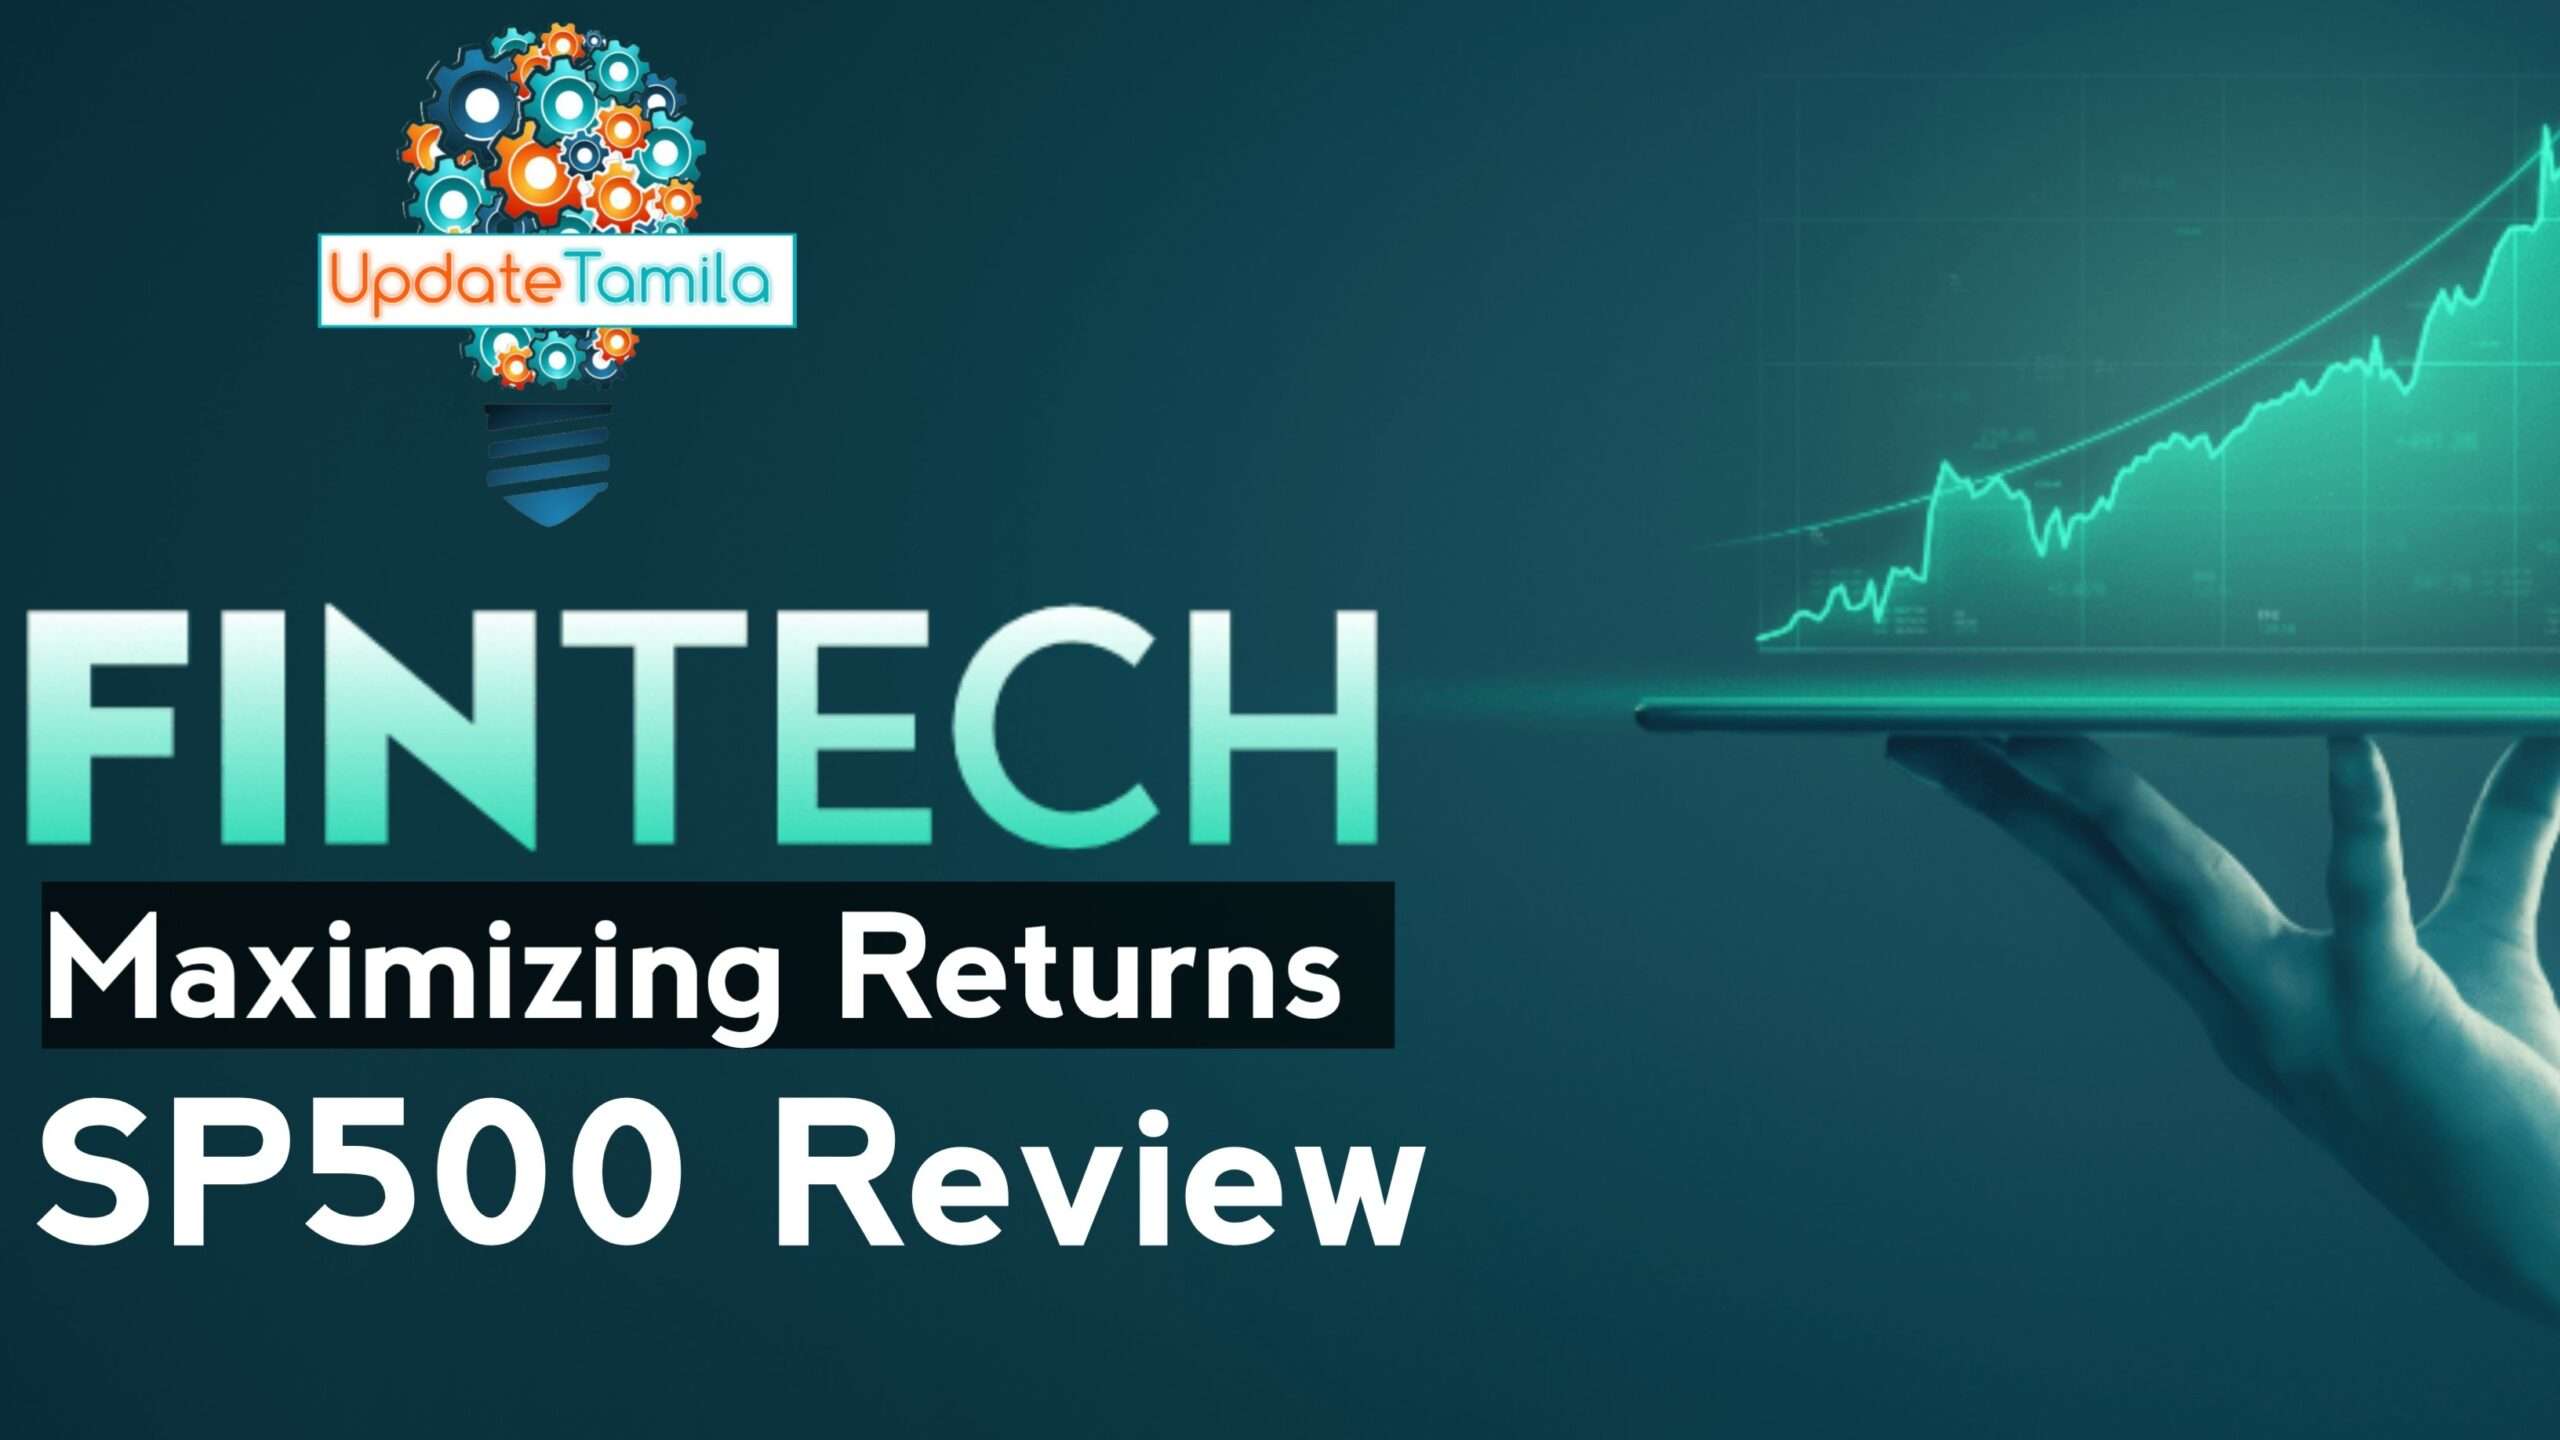 Maximizing Returns with the Fintechzoom SP500 Review